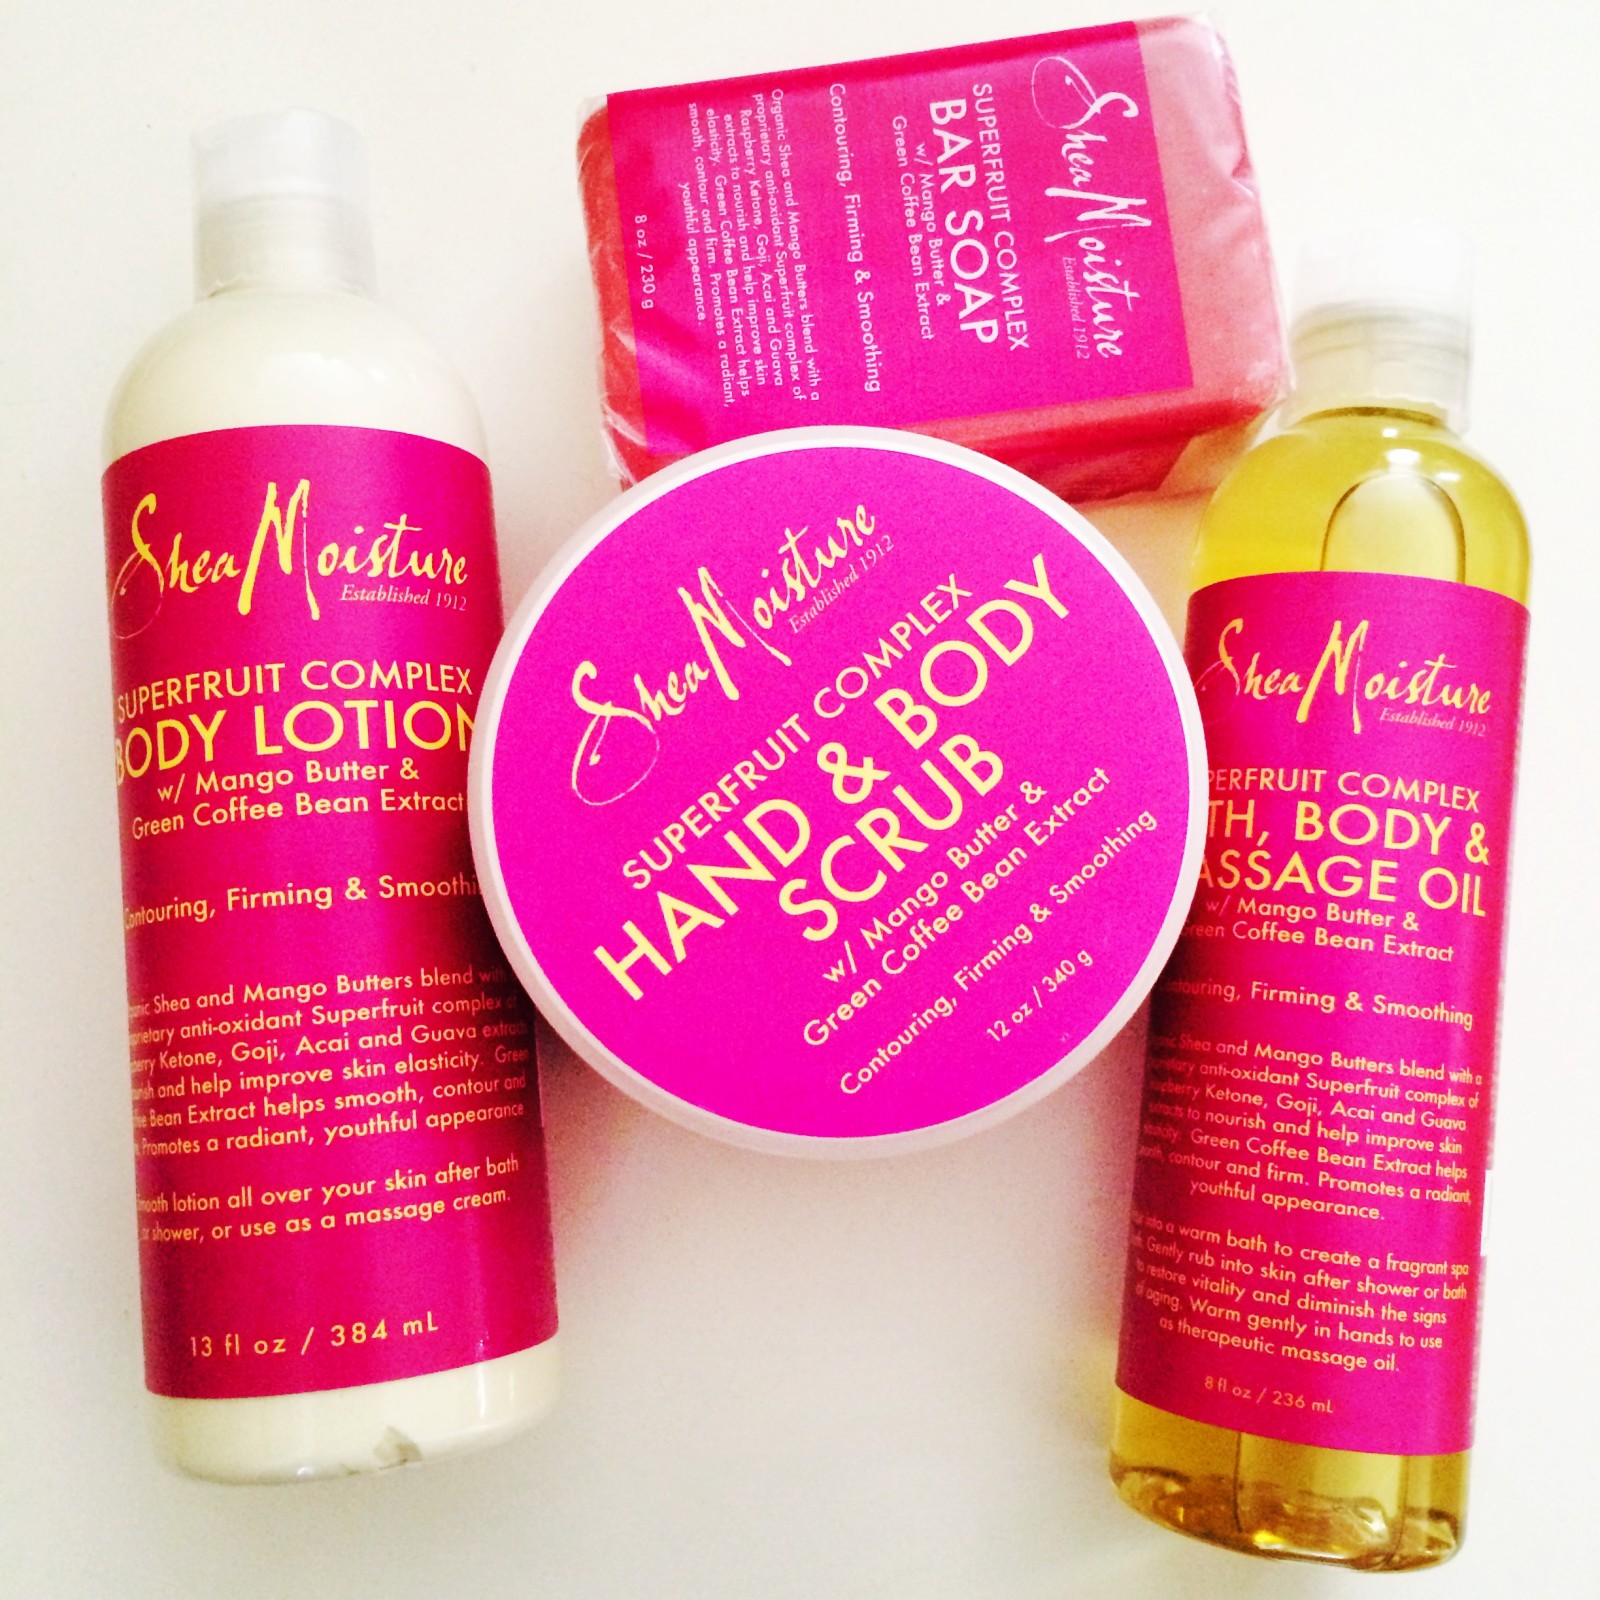 New SheaMoisture SuperFruit Complex Firms, Smooths, and helps you say Goodbye to Cellulite